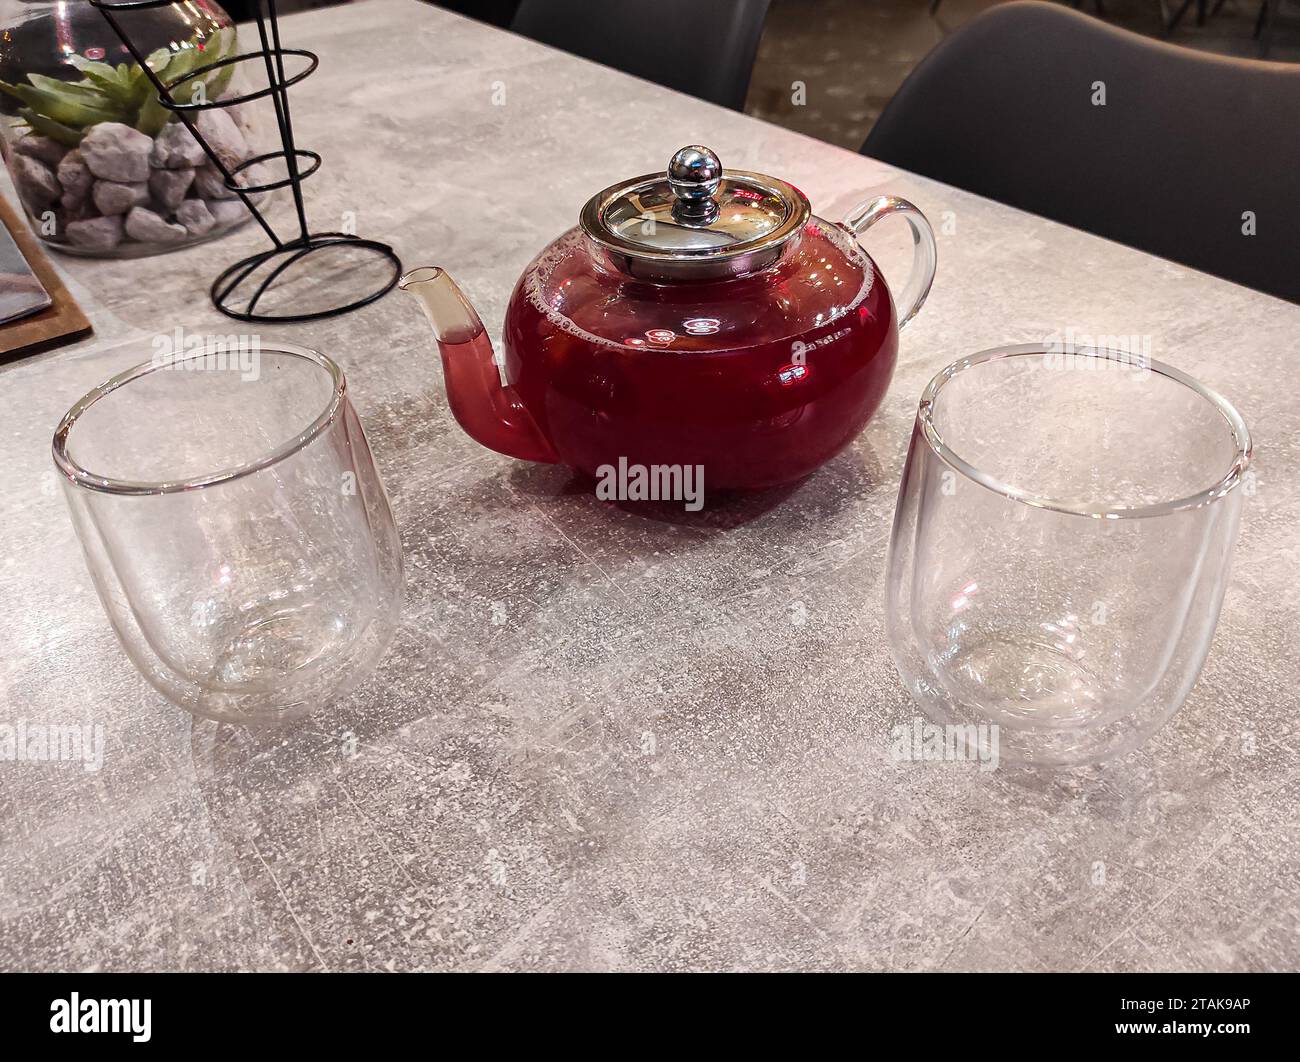 https://c8.alamy.com/comp/2TAK9AP/a-glass-kettle-with-fruit-tea-in-it-and-two-regular-glasses-beside-it-2TAK9AP.jpg